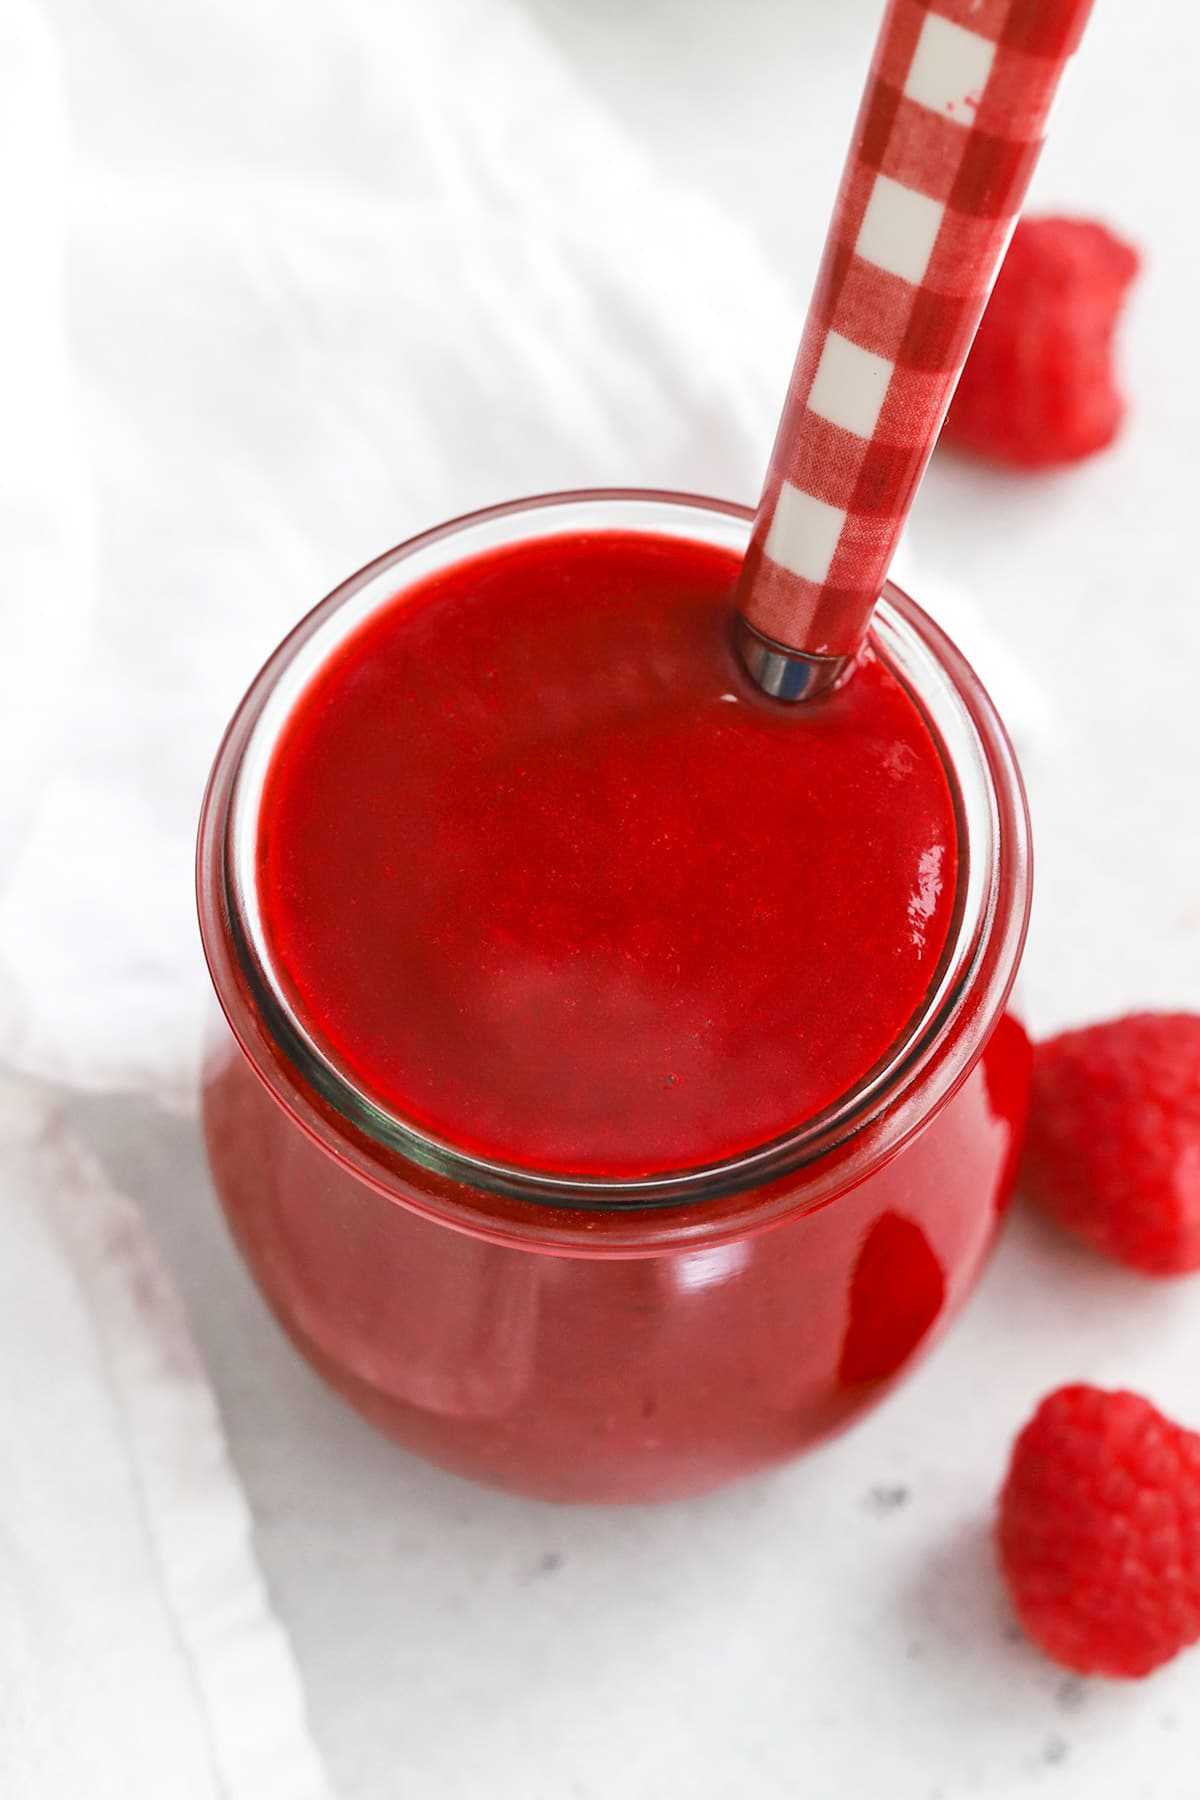 Front view of fresh raspberry sauce in a jar